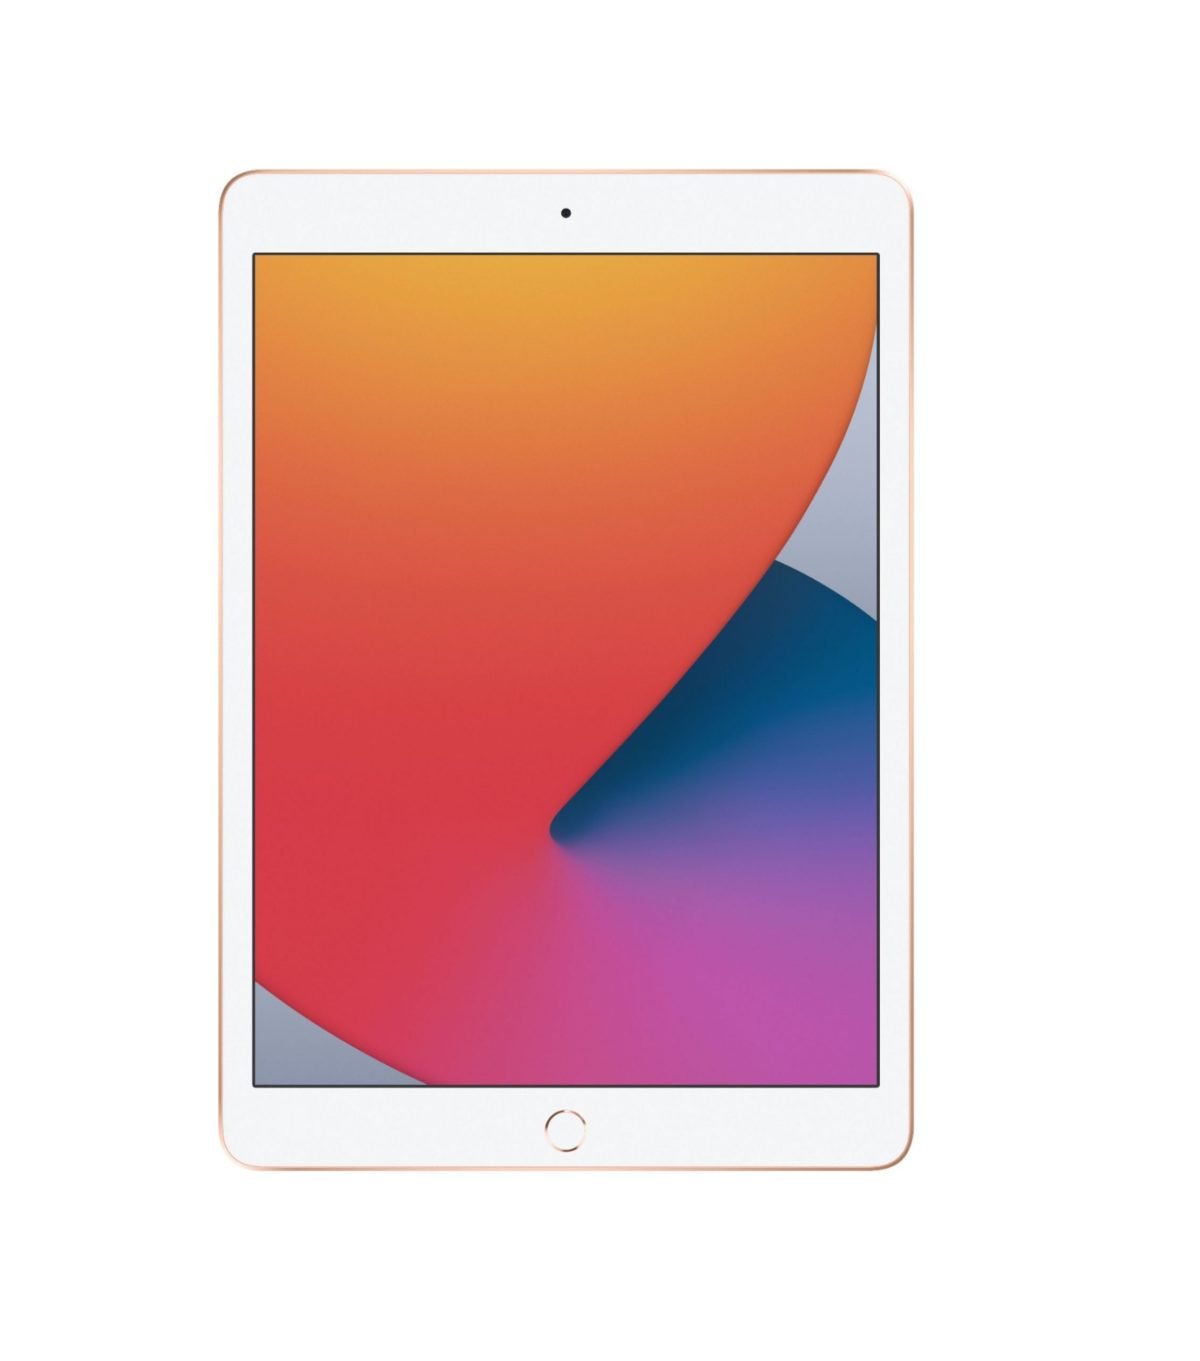 5199902 Sd Scaled Apple &Lt;H1&Gt;Apple - 10.2-Inch Ipad - Latest Model - (8Th Generation) With Wi-Fi - 32Gb - Gold&Lt;/H1&Gt; &Lt;Div Class=&Quot;Product-Description&Quot;&Gt;The New Ipad. It'S Your Digital Notebook, Mobile Office, Photo Studio, Game Console, And Personal Cinema. With The A12 Bionic Chip That Can Easily Power Essential Apps And Immersive Games. So You Can Edit A Document While Researching On The Web And Making A Facetime Call To A Colleague At The Same Time. Apple Pencil Makes Note-Taking With Ipad A Breeze.¹ Attach A Full-Size Smart Keyboard For Comfortable Typing.¹ And Go Further With Wi-Fi And Gigabit-Class Lte² And All-Day Battery Life.³&Lt;/Div&Gt; Apple - 10.2-Inch Ipad - Latest Model - (8Th Generation) With Wi-Fi - 32Gb - Gold